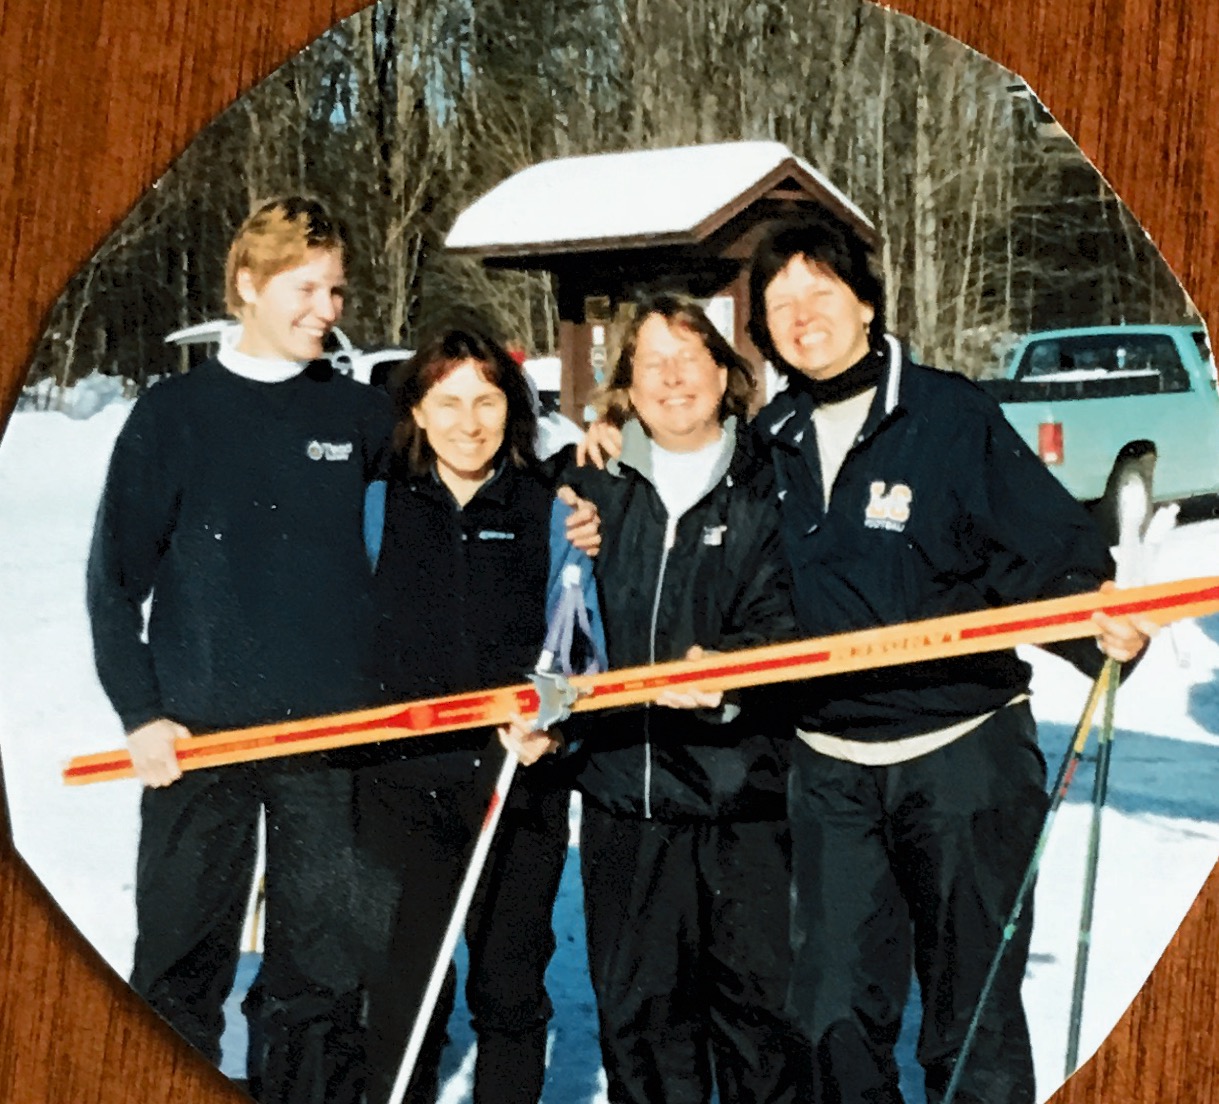 Denise, Marci, Jan and myself skiing at Valley Spur in Munising. 1/24/2002